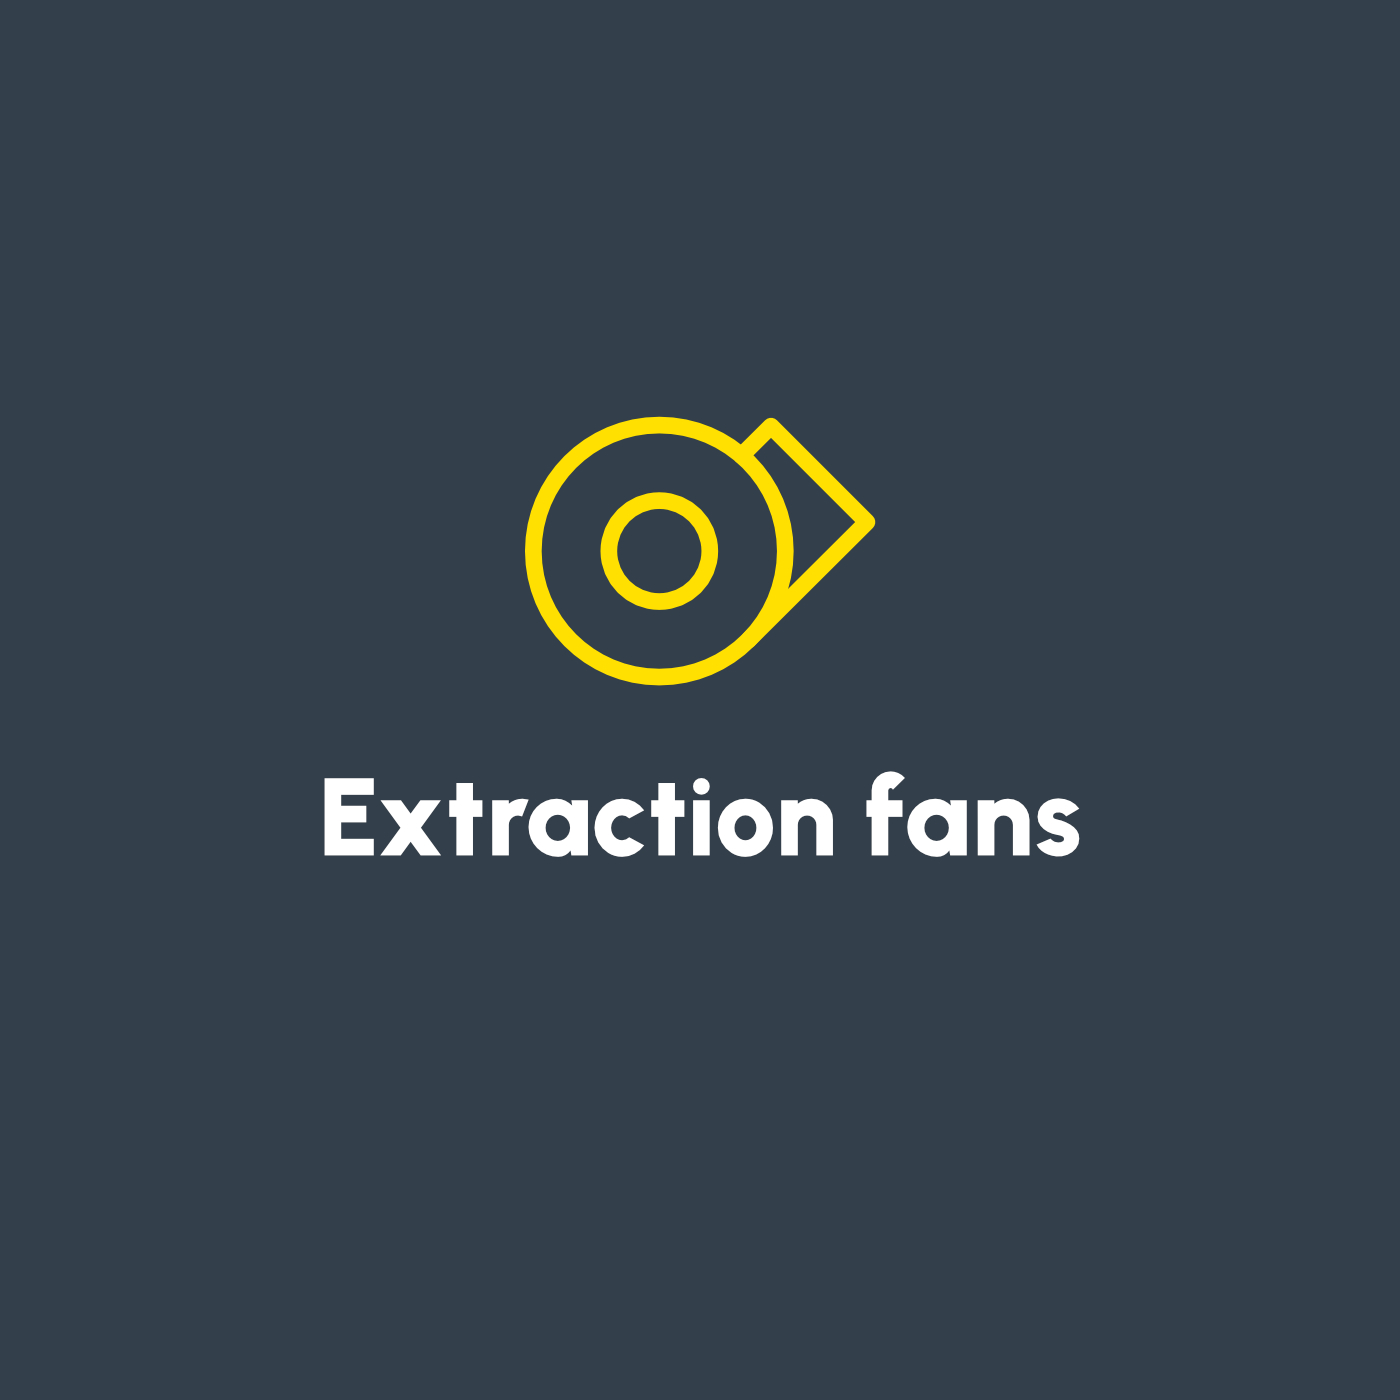 Extraction fans